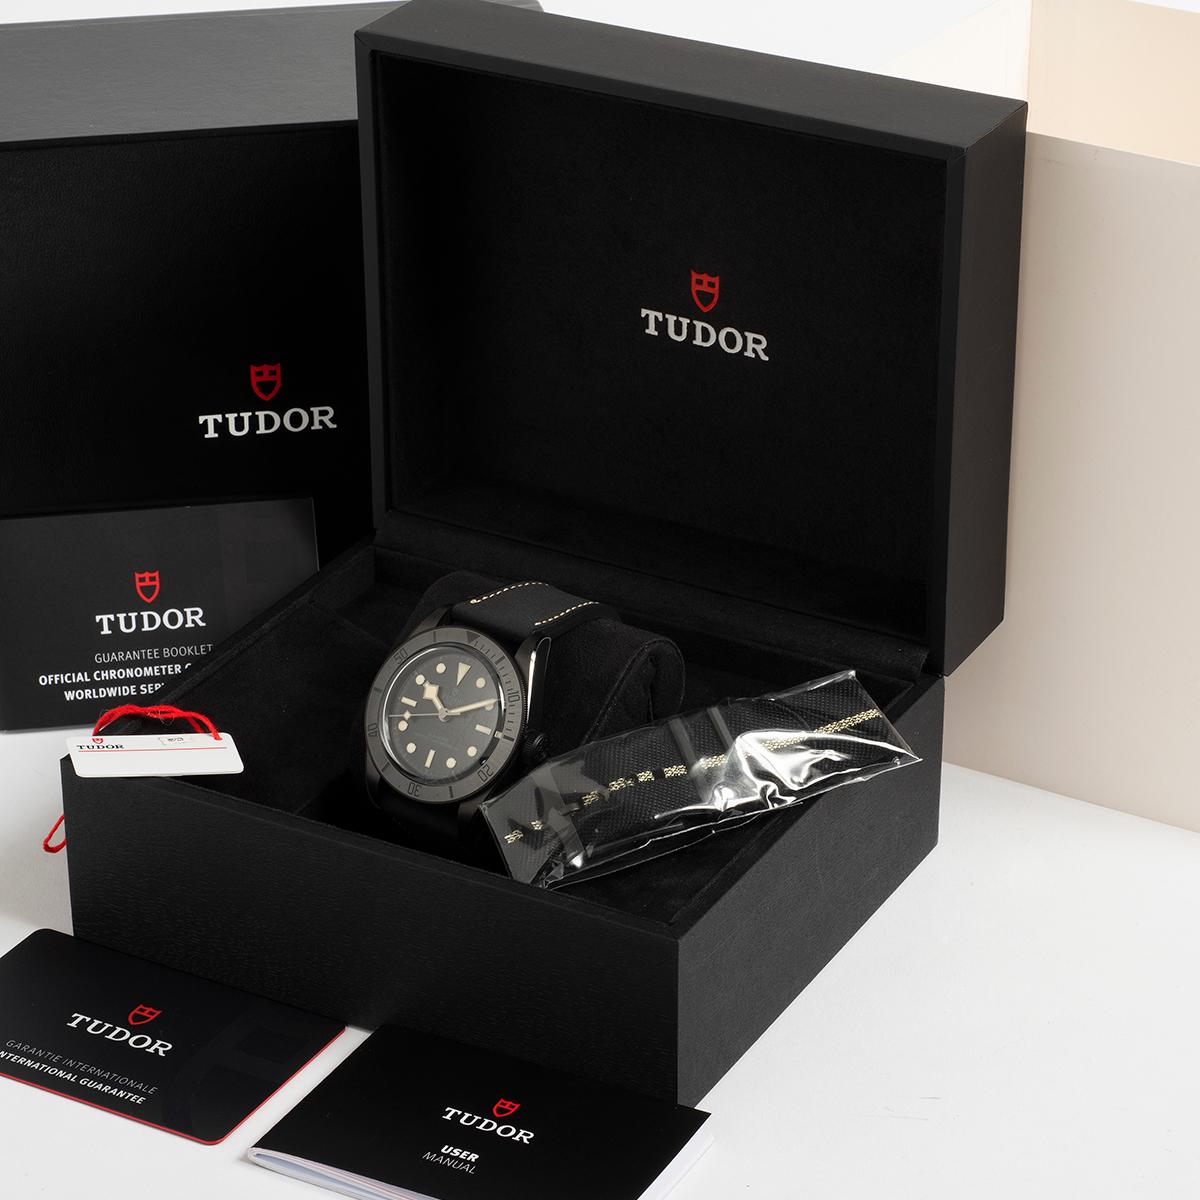 Our Tudor Black Bay ceramic reference 79210CNU features a 41mm black ceramic case with sapphire glass exhibition caseback and leather strap with deployant clasp. This ceramic Black Bay is presented in as new condition with little sign of use, the